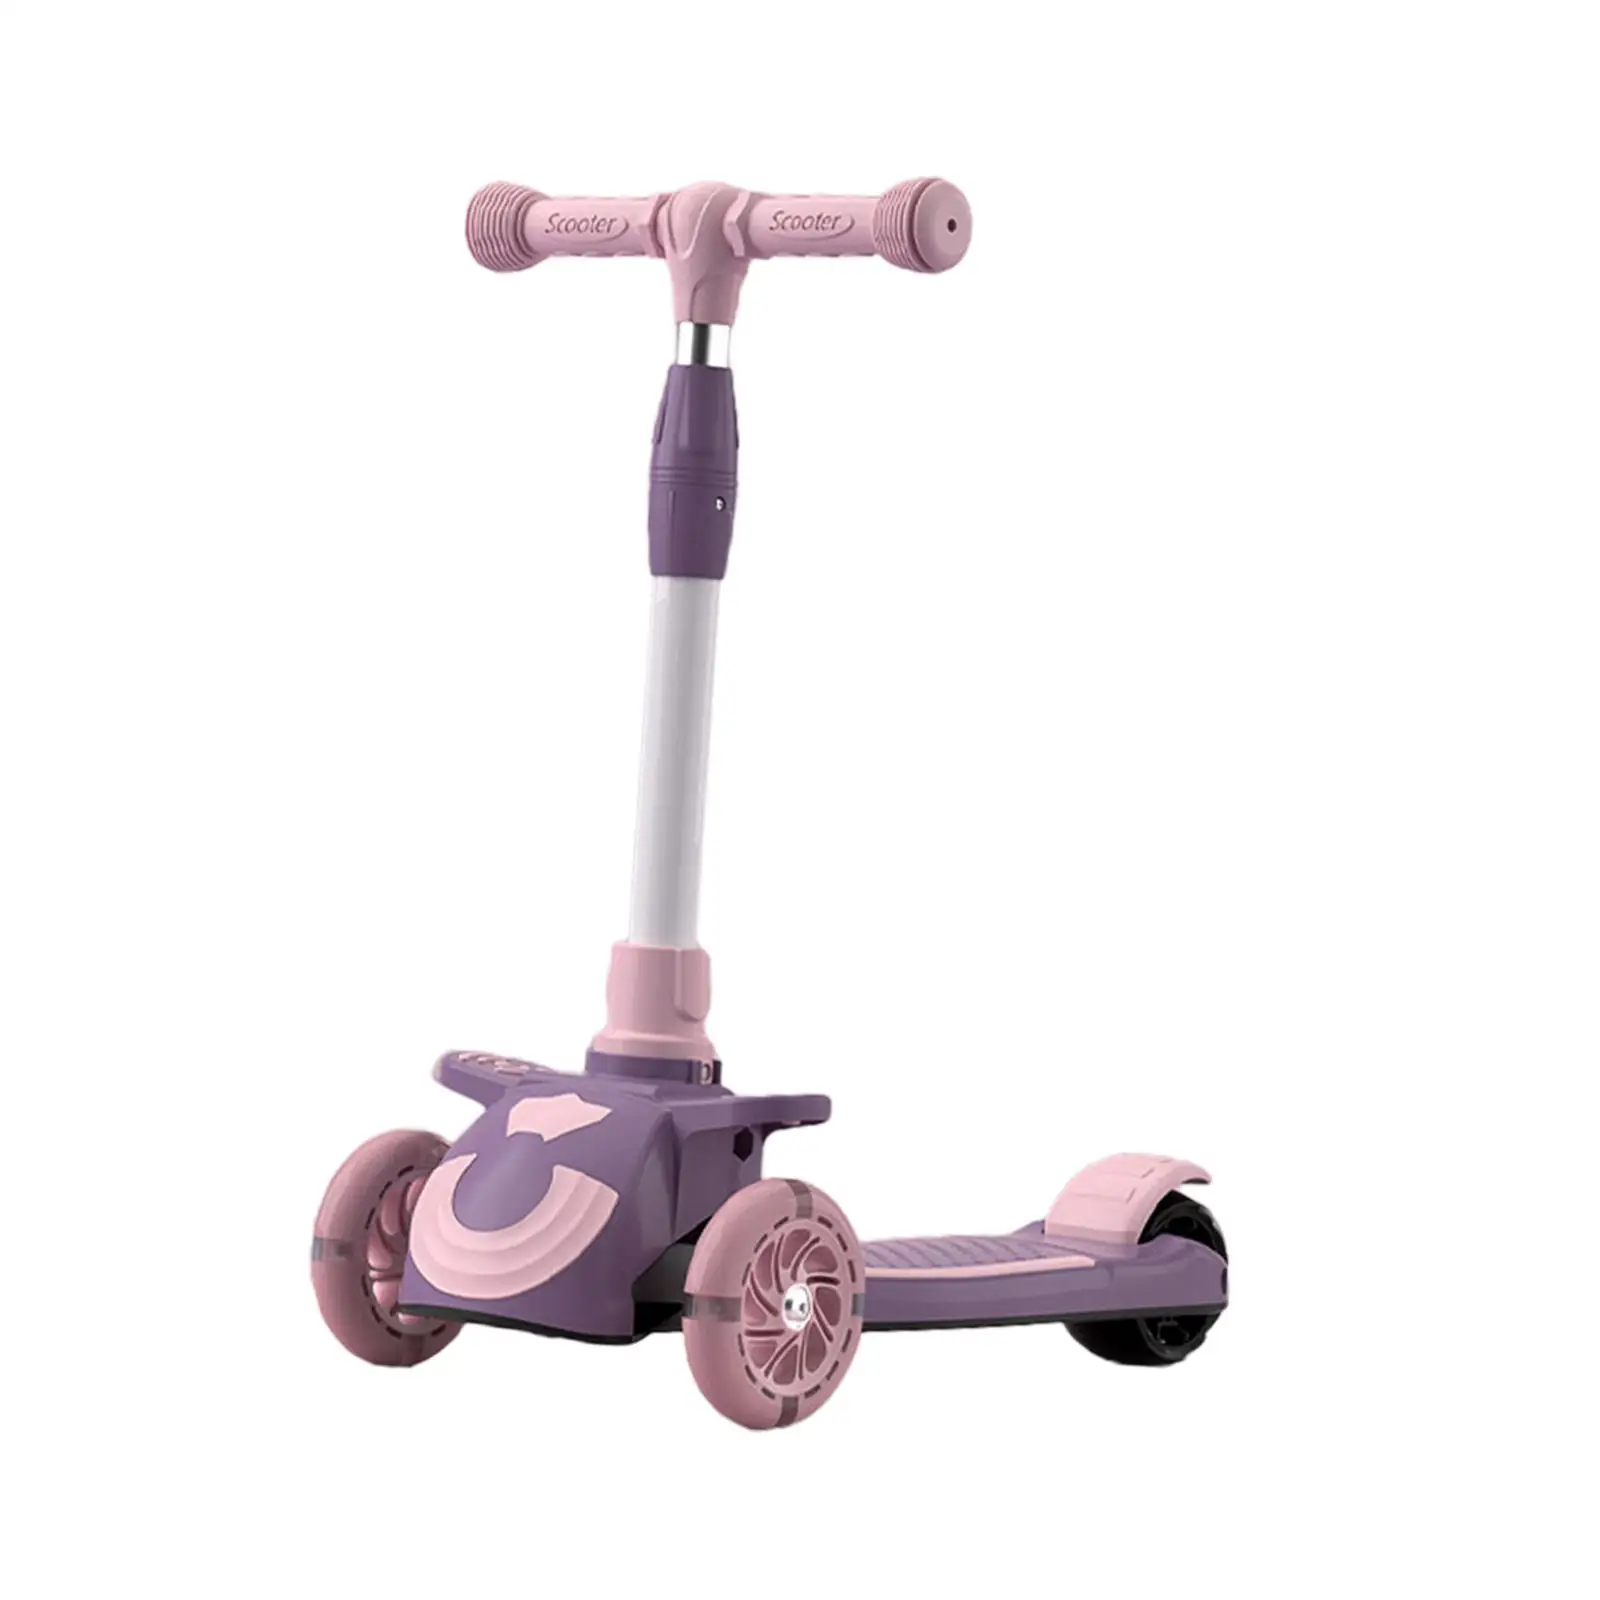 Kids Scooter Stable Adjustable Handlebar 3 Wheel Scooter for Park Patio